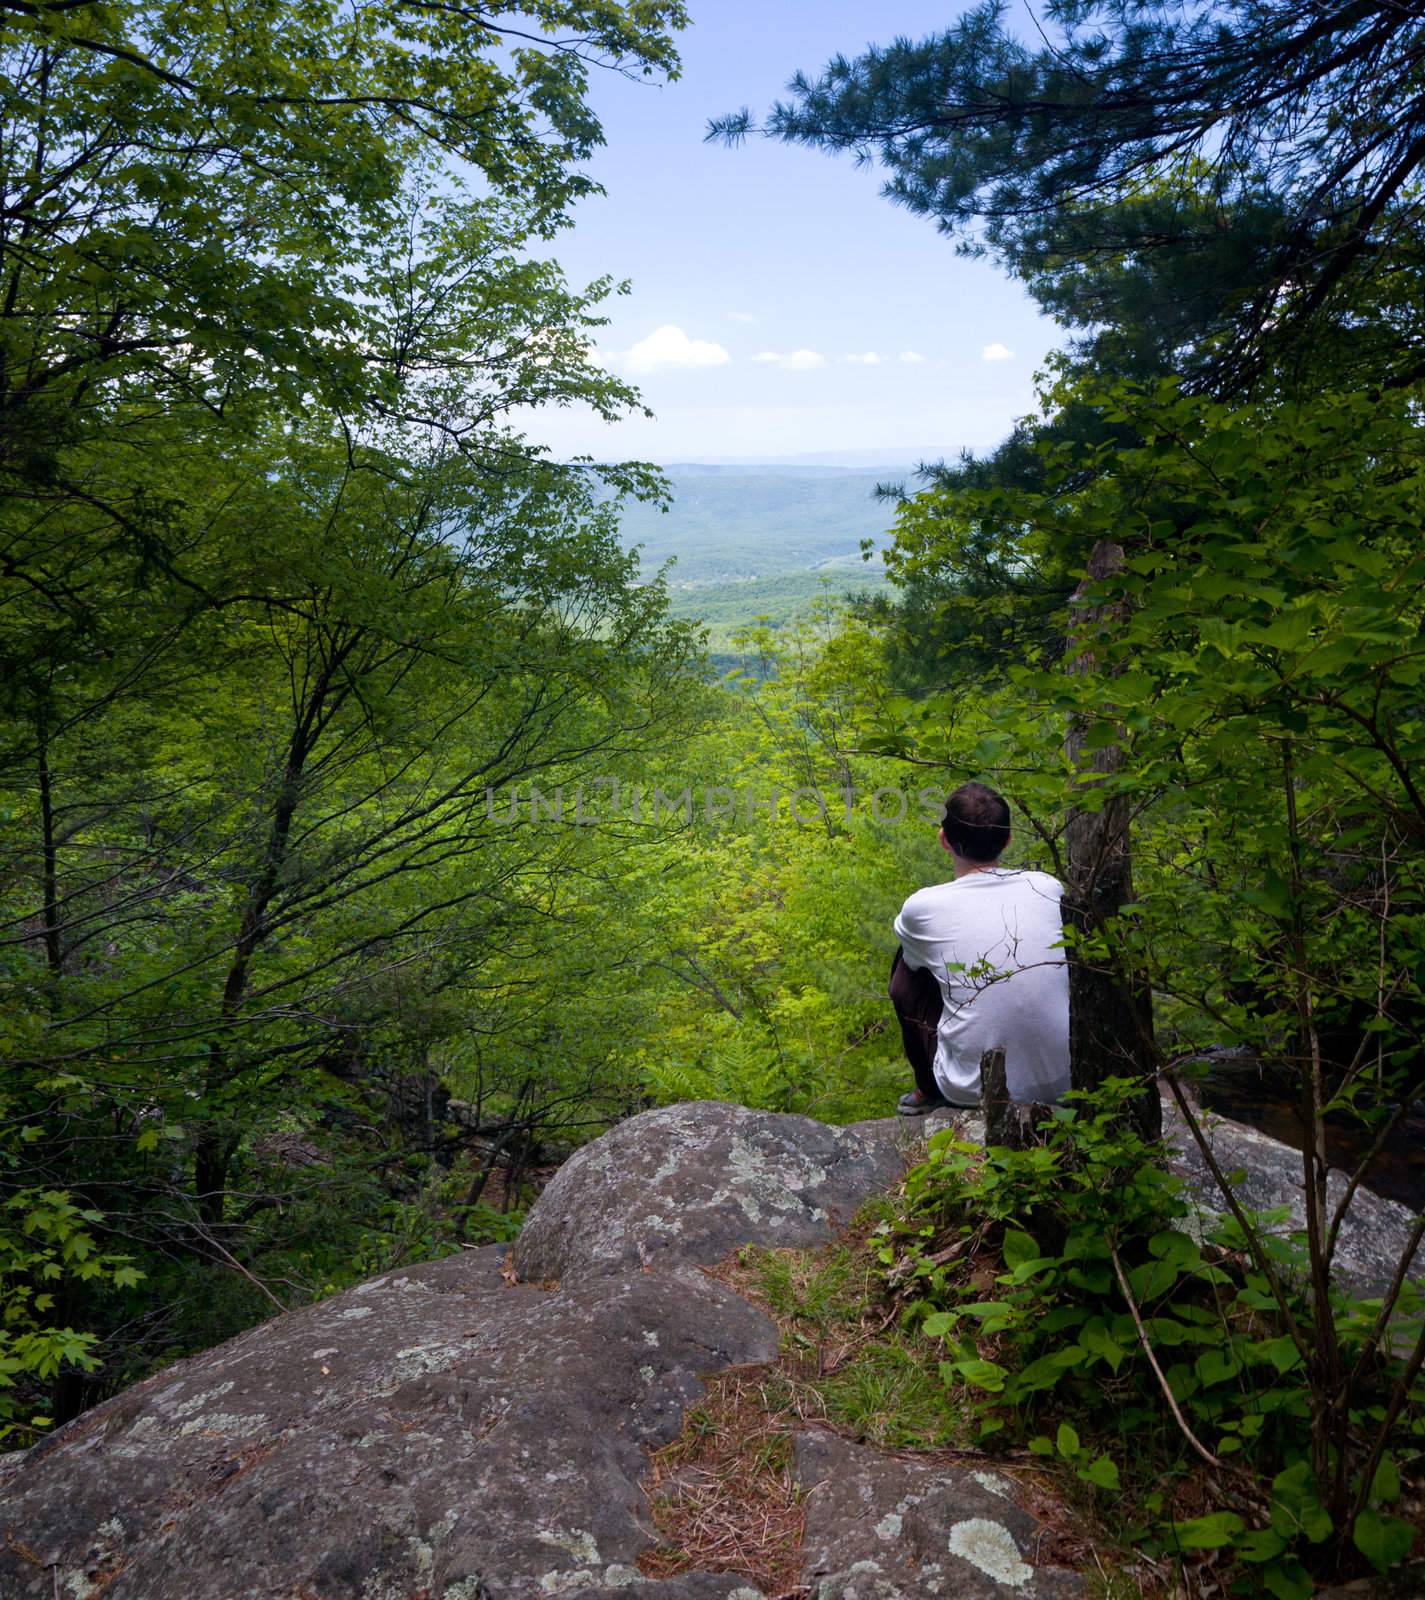 Hiker overlooks Shenandoah Valley by steheap